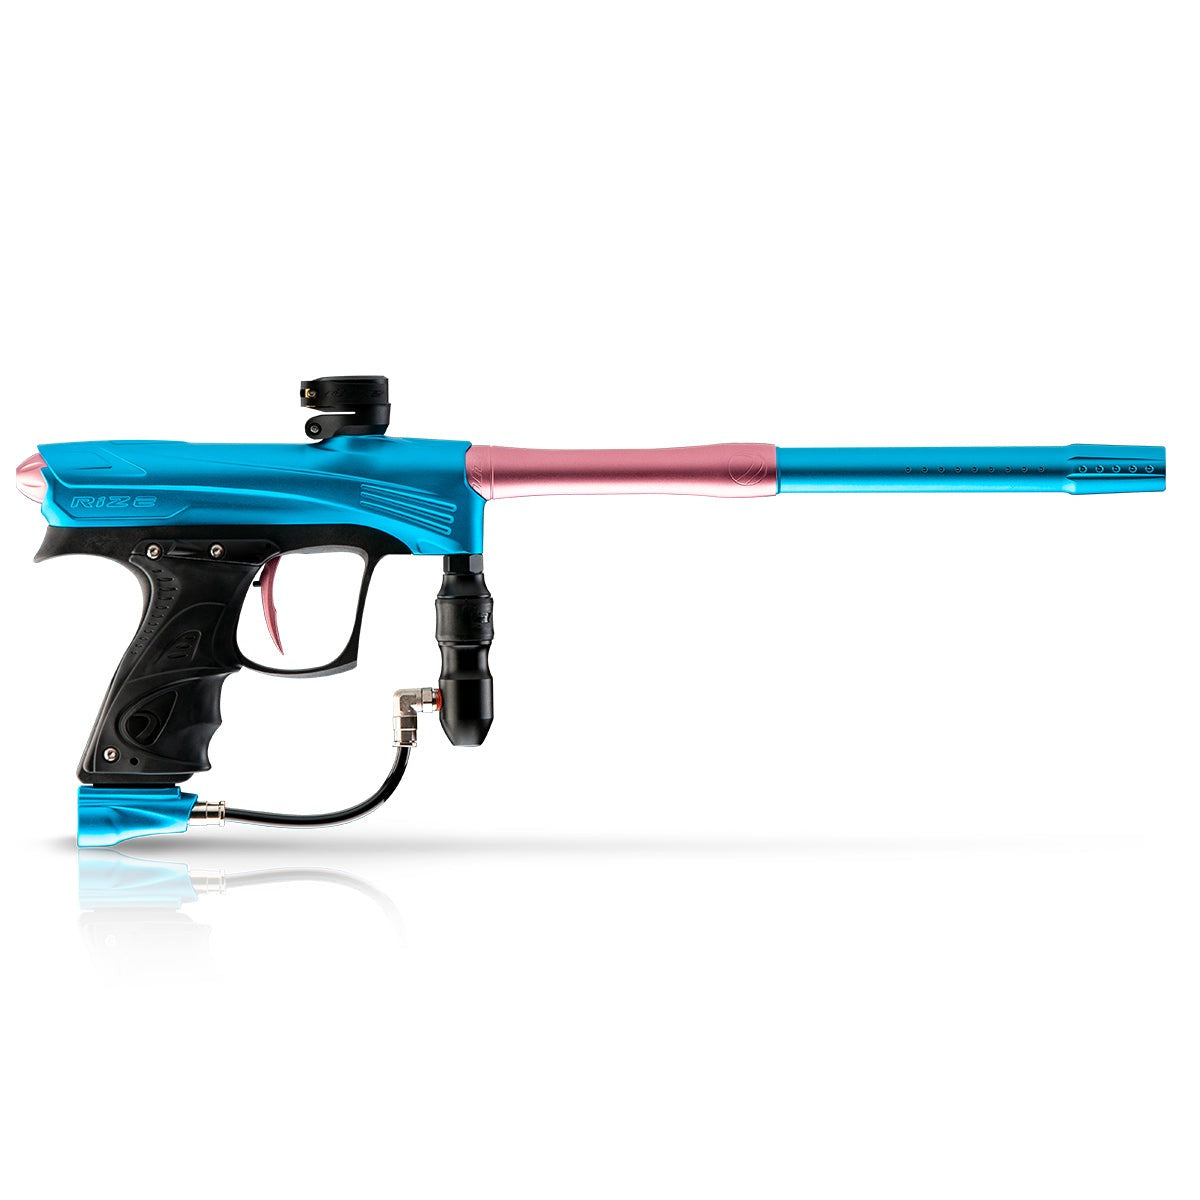 Dye Rize CZR - Teal Blue with Pink